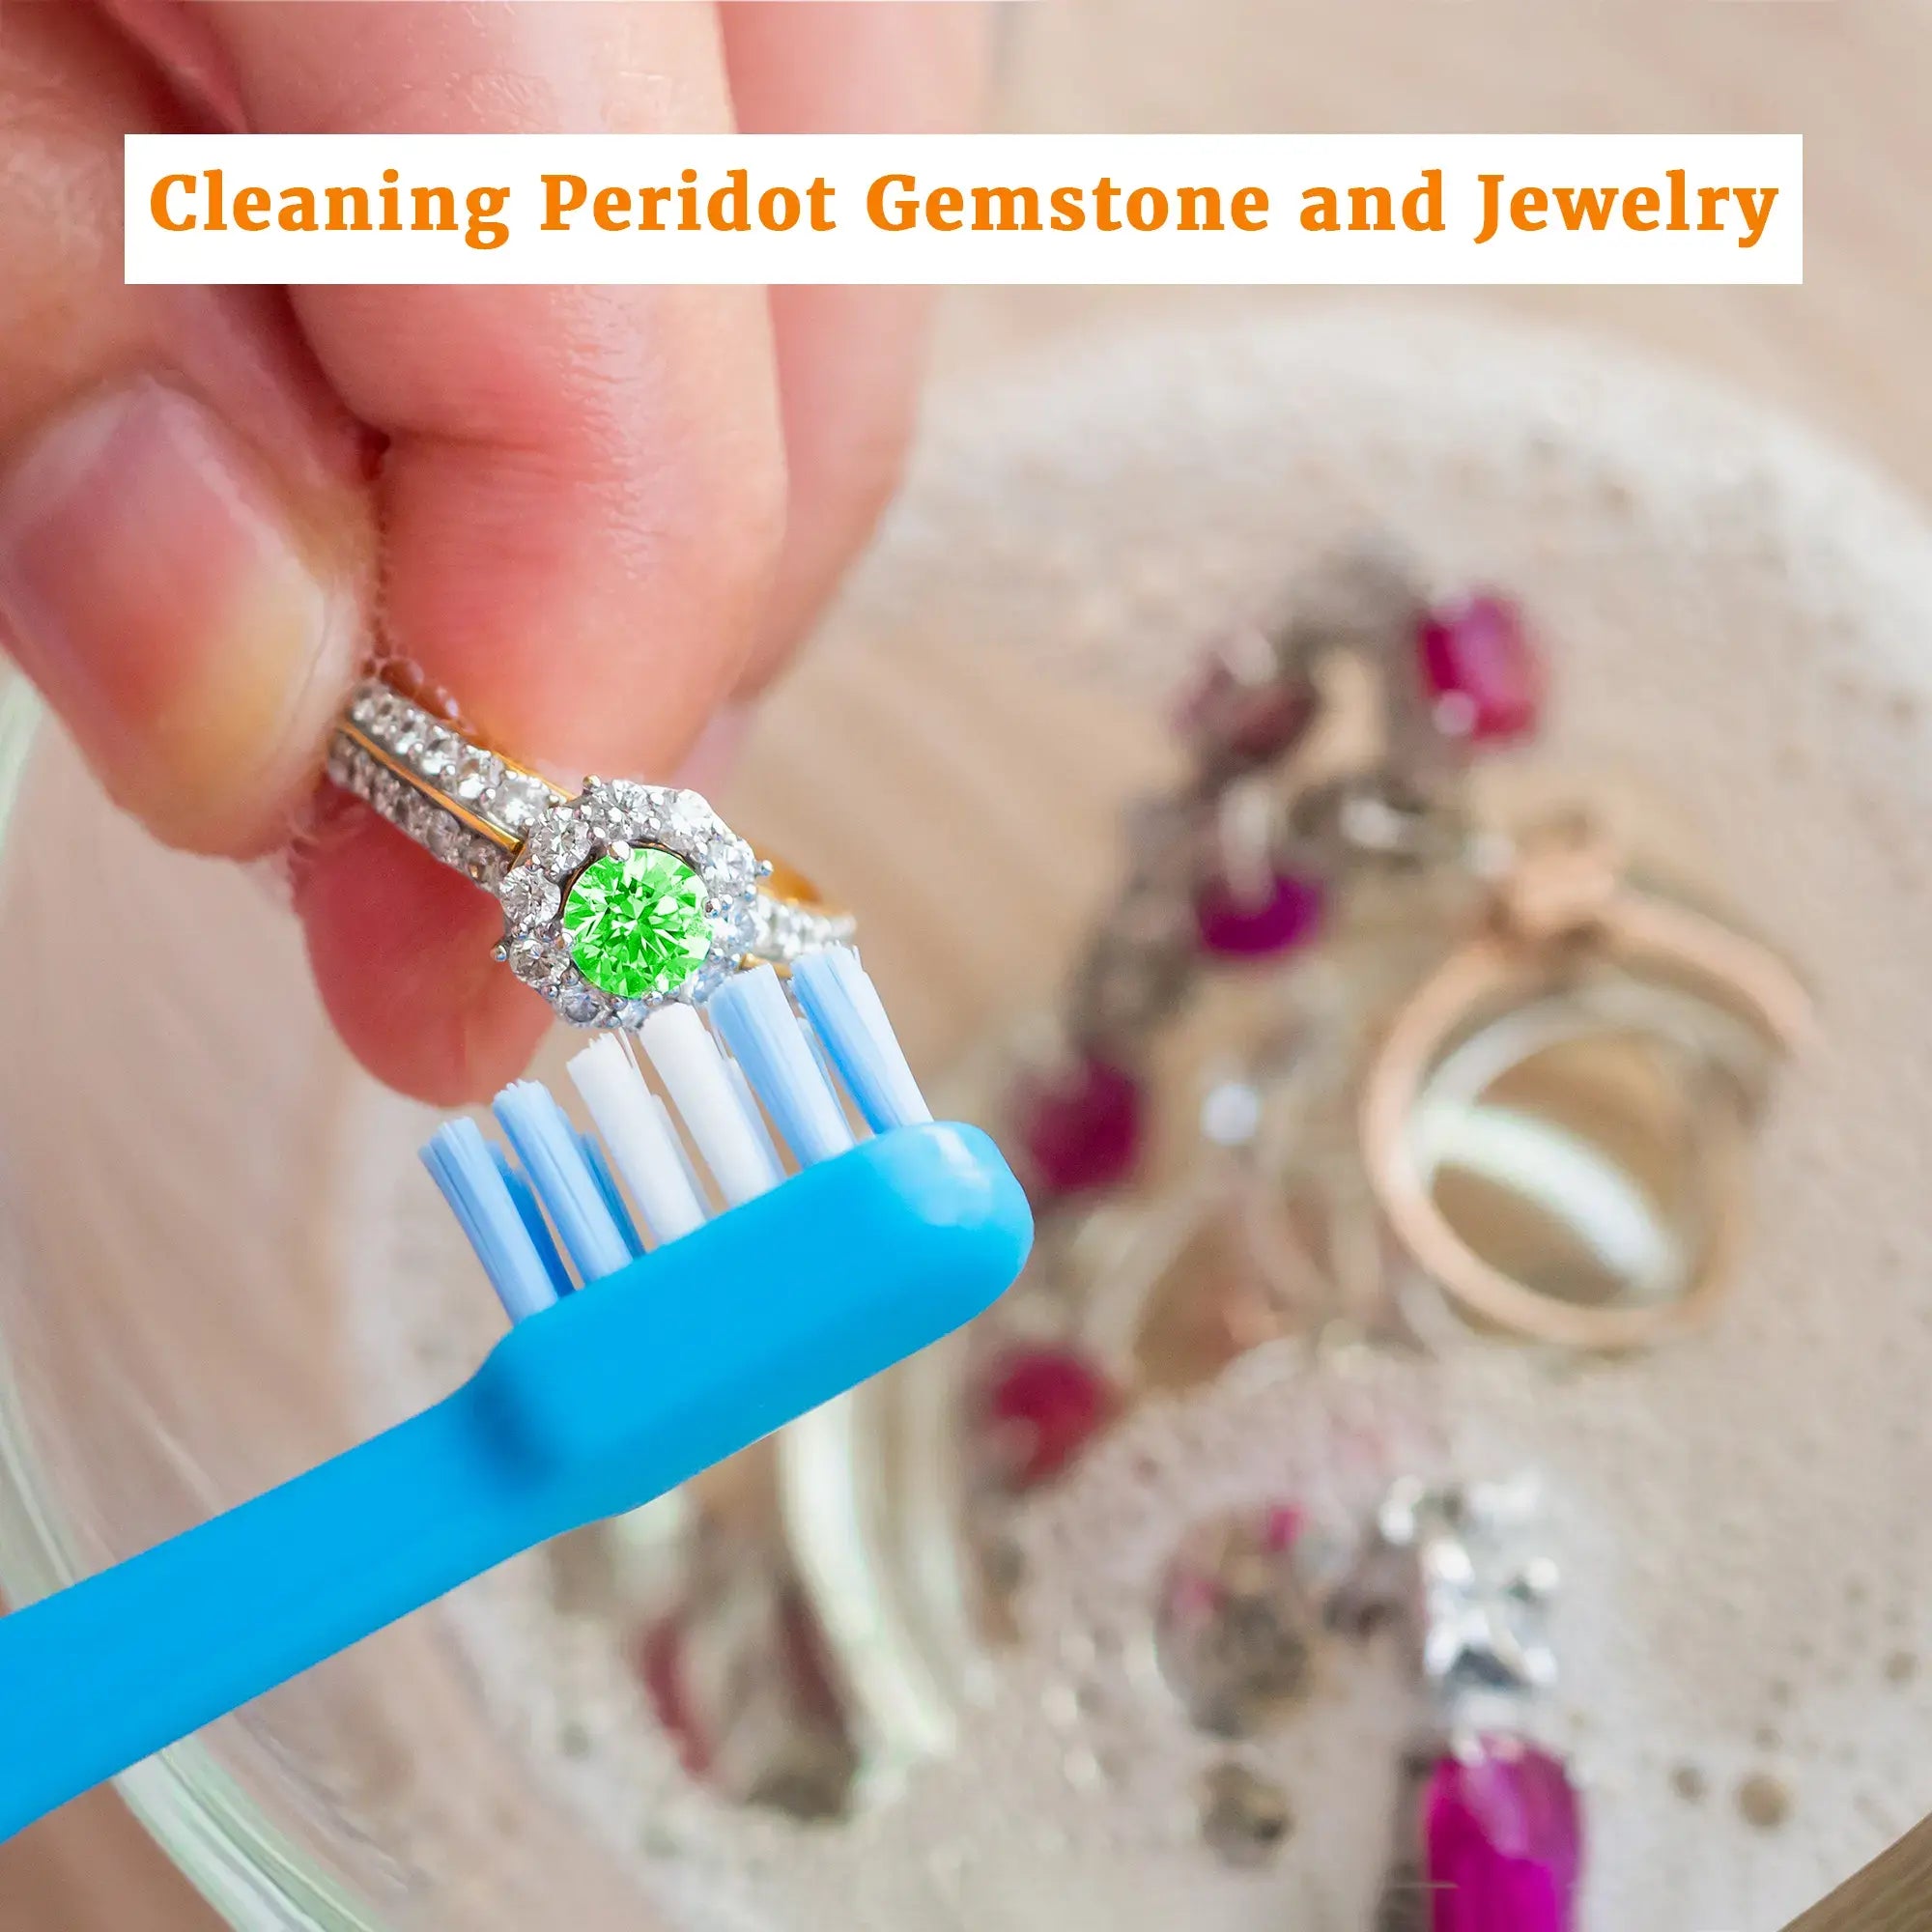 Cleaning of peridot gemstone and jewelry